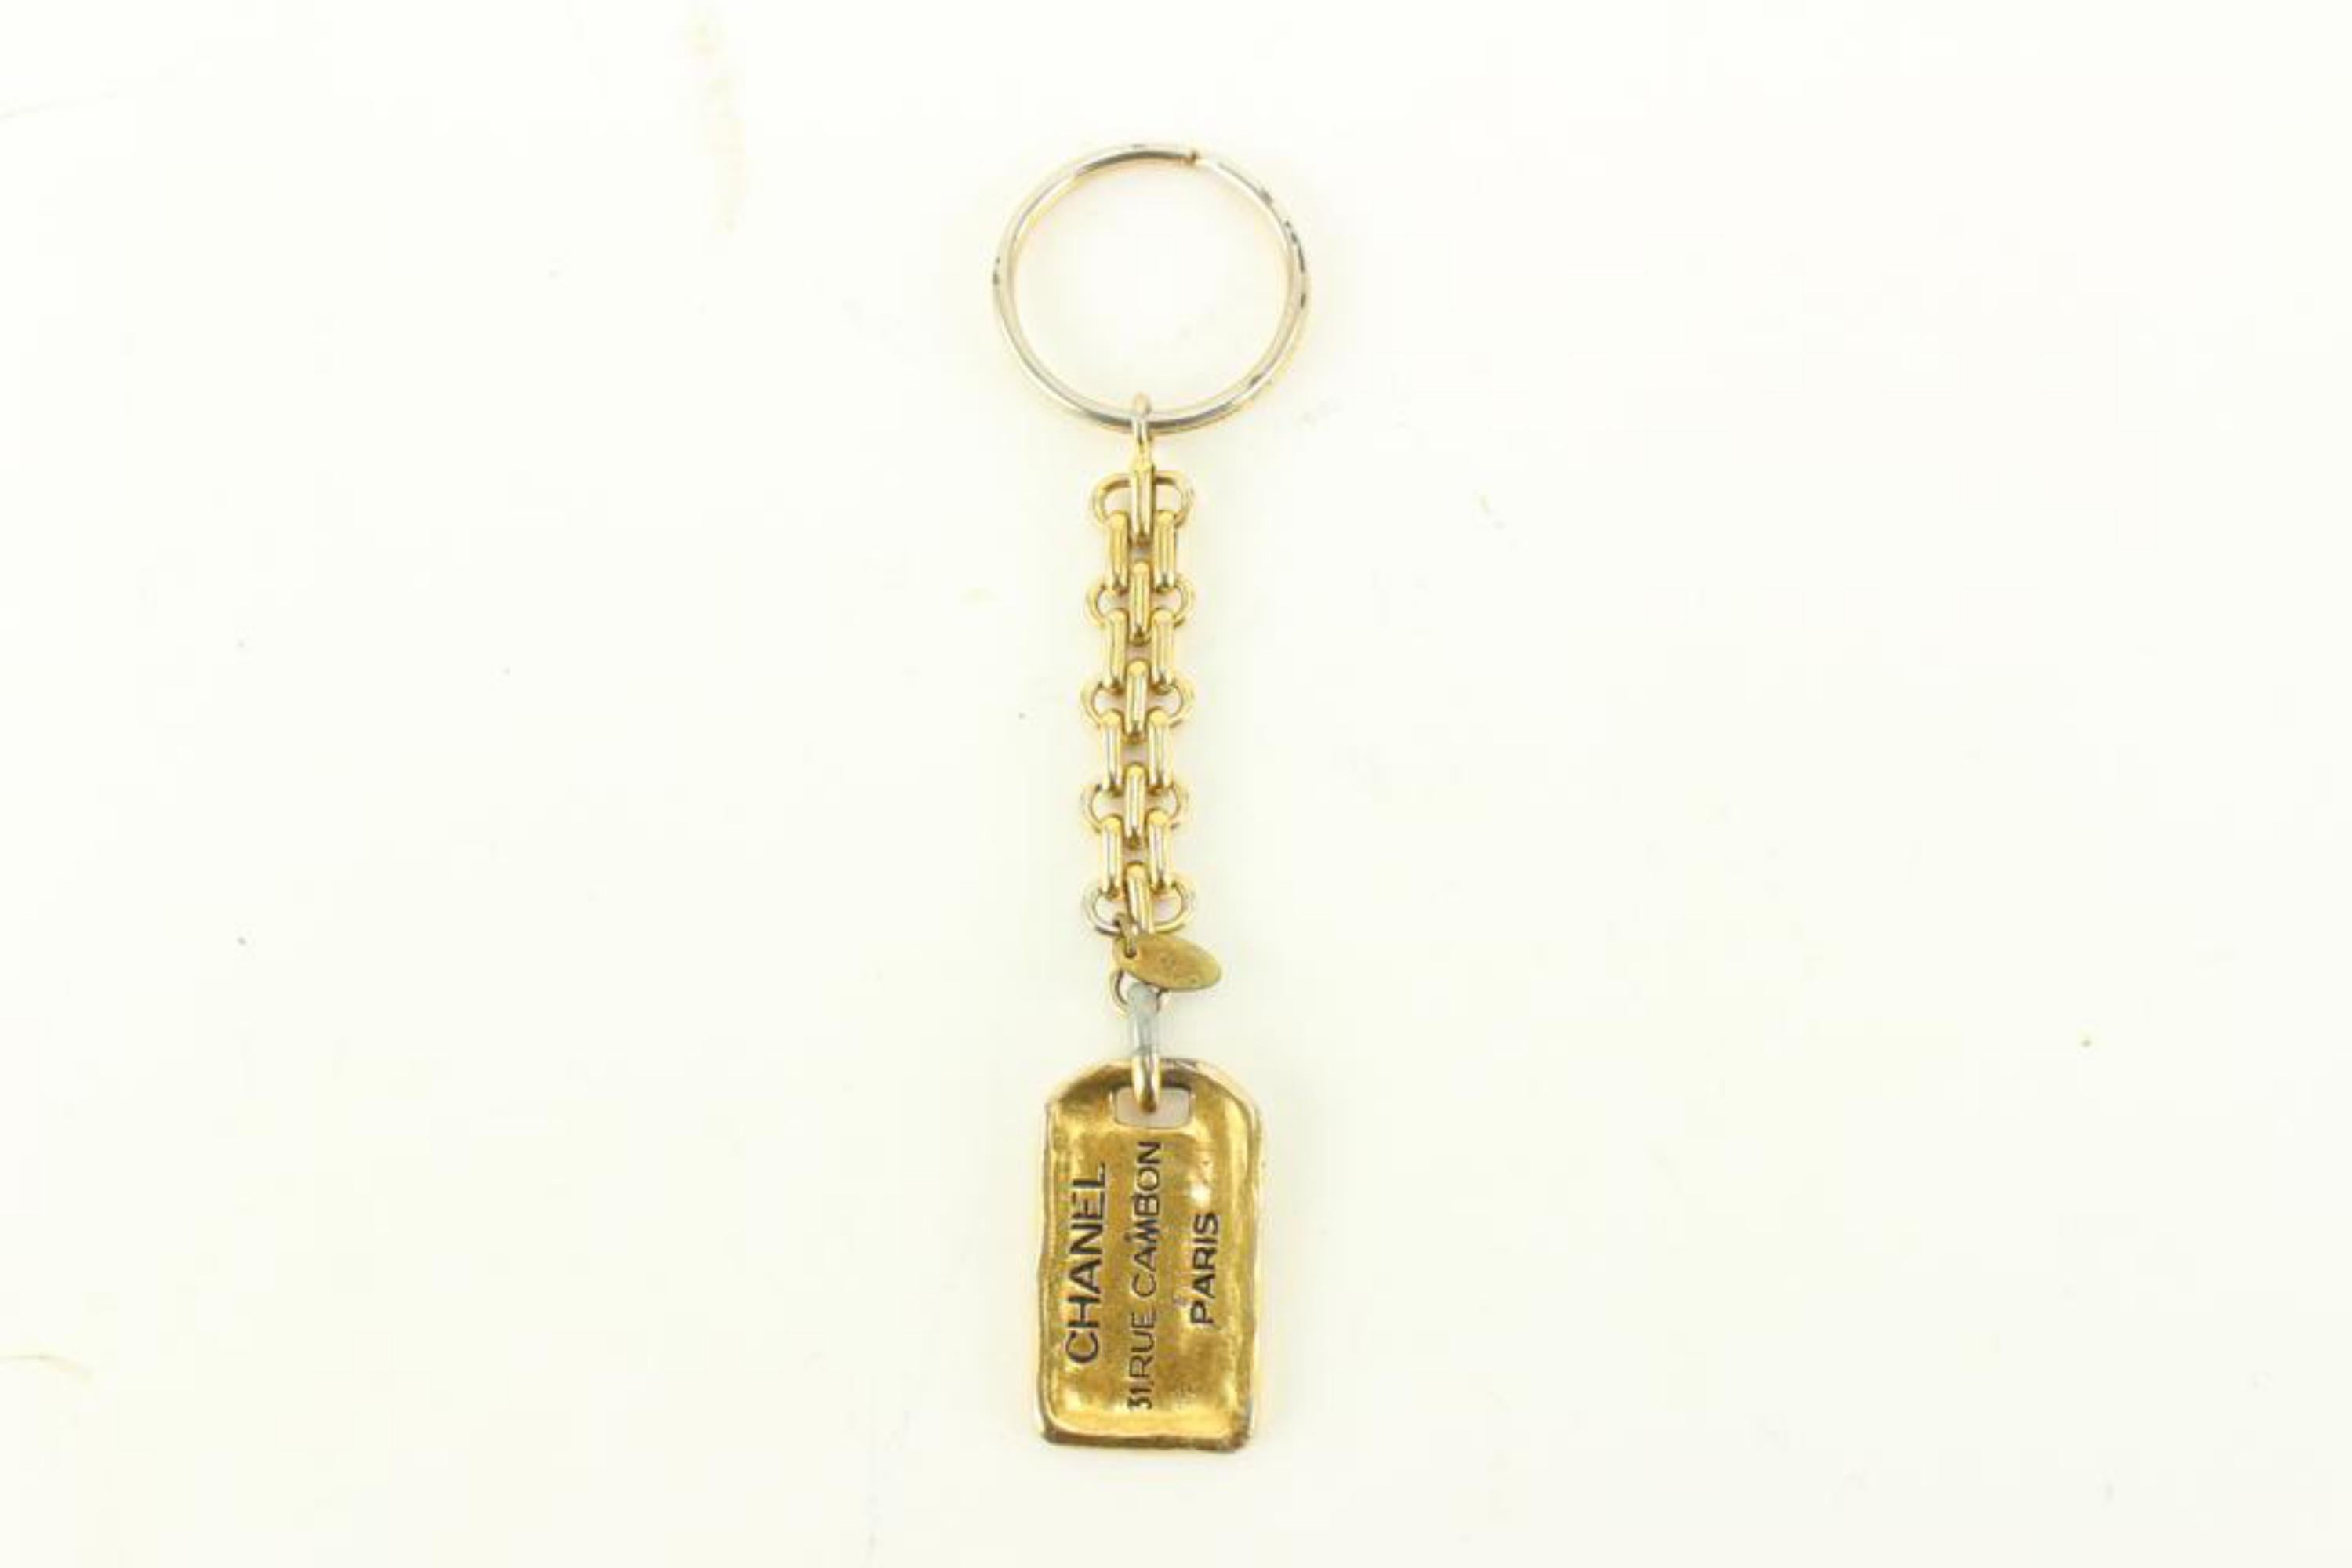 Chanel Vintage Gold Plated Rue Cambon CC Keychain Bag Charm Pendant 81ca711s 6